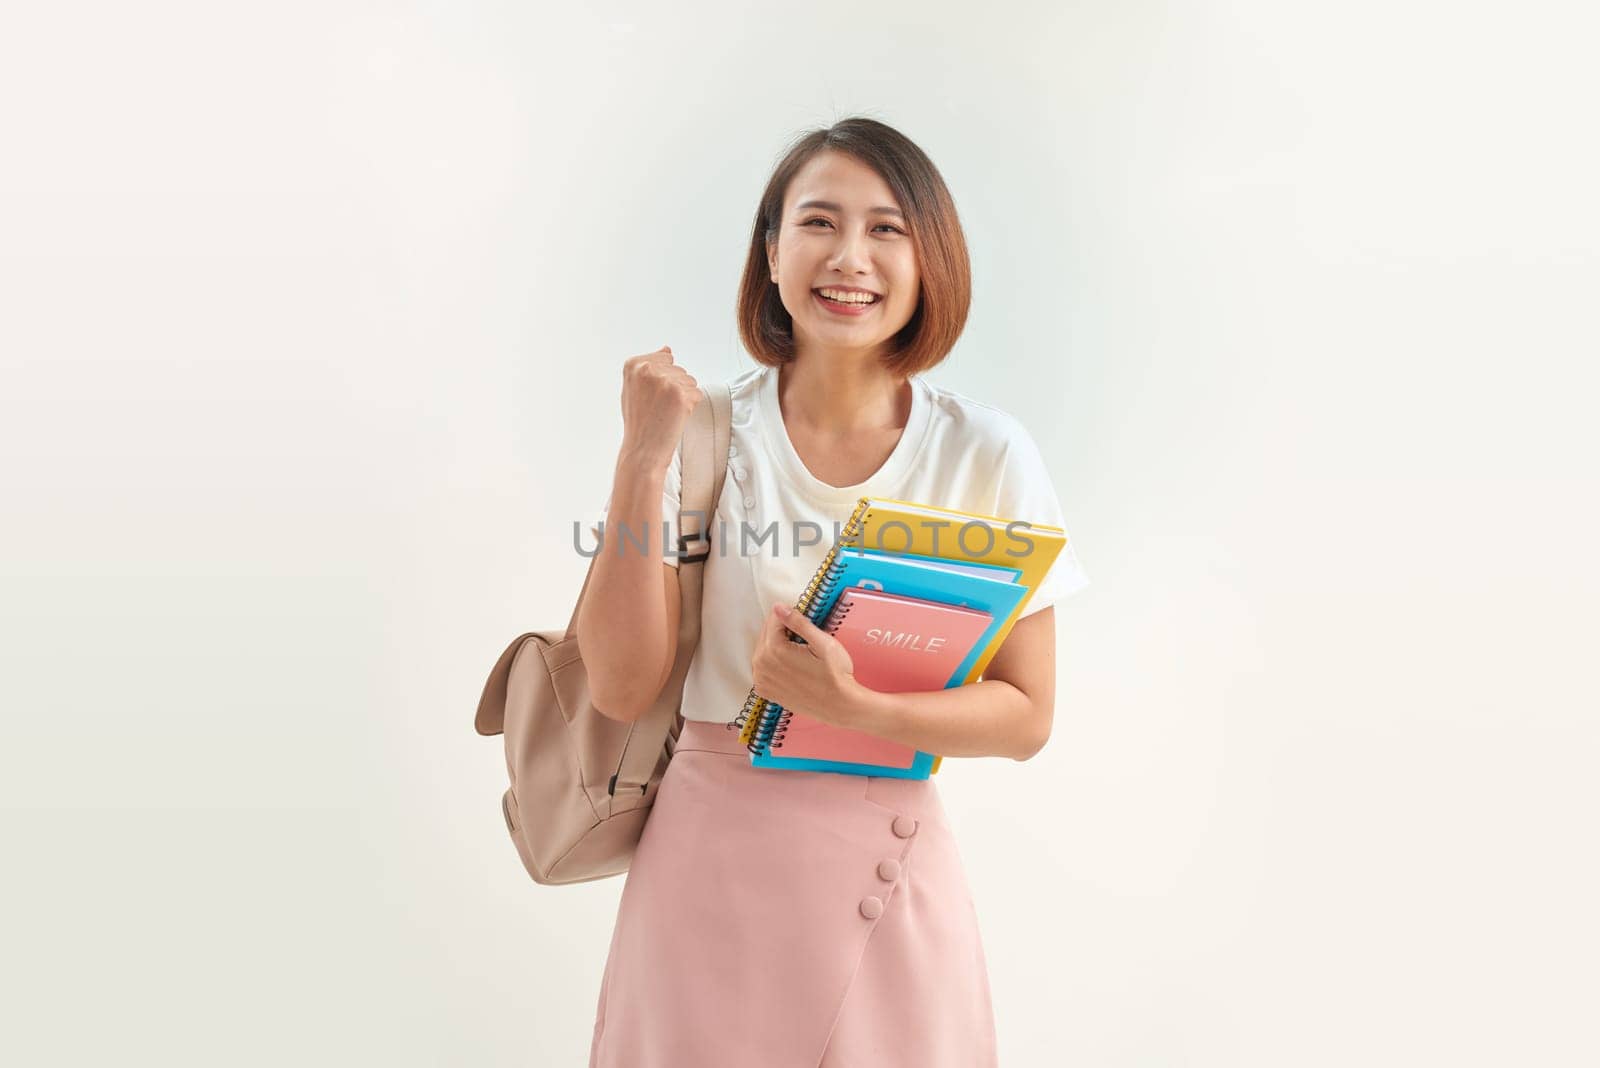 Portrait of smiling woman holding book and backpack leaning on white background by makidotvn